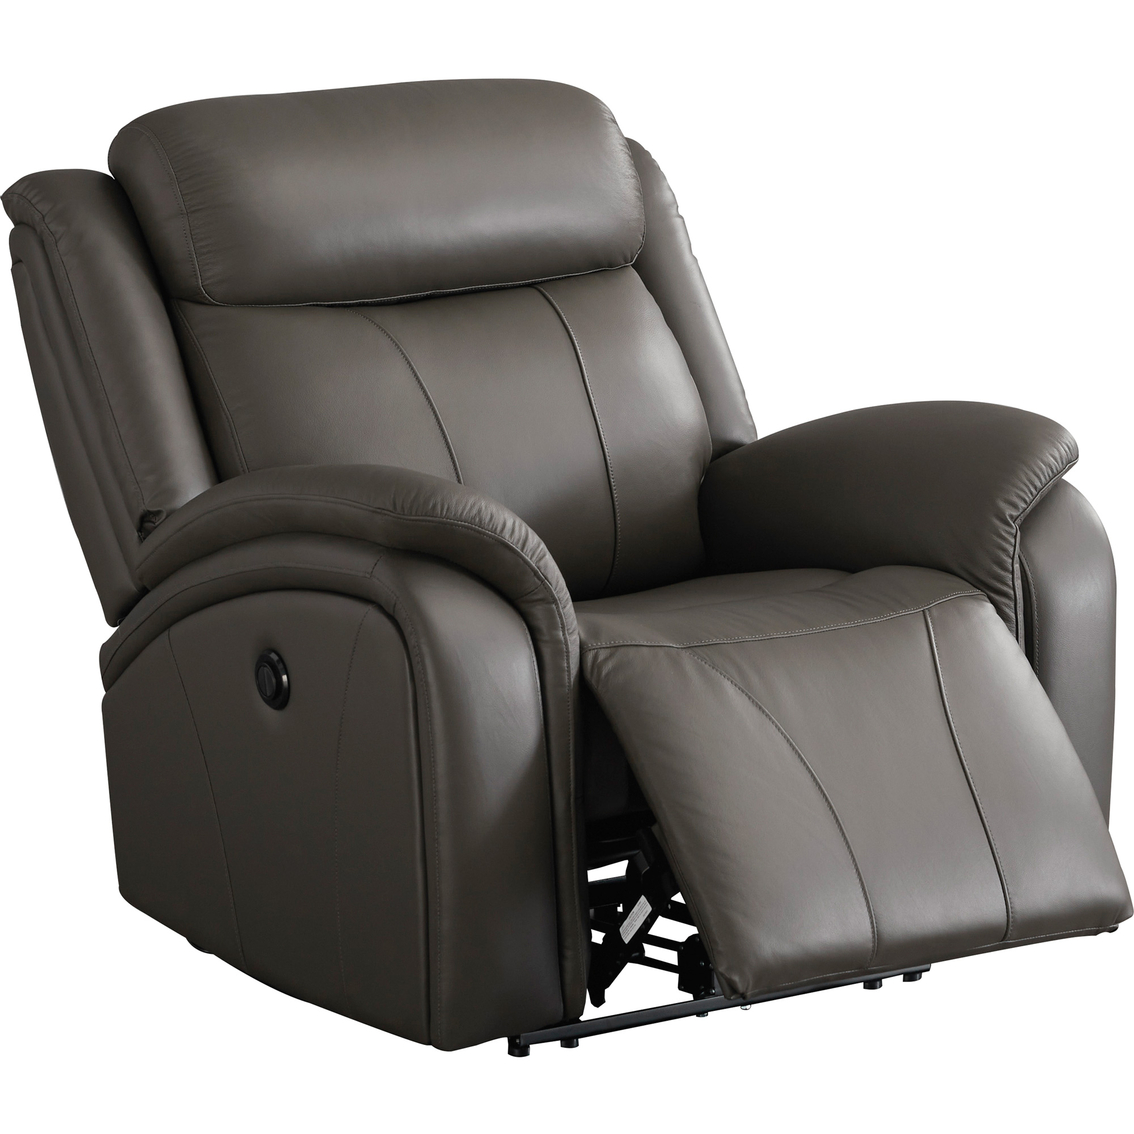 Signature Design by Ashley Chasewood Power Recliner - Image 2 of 9